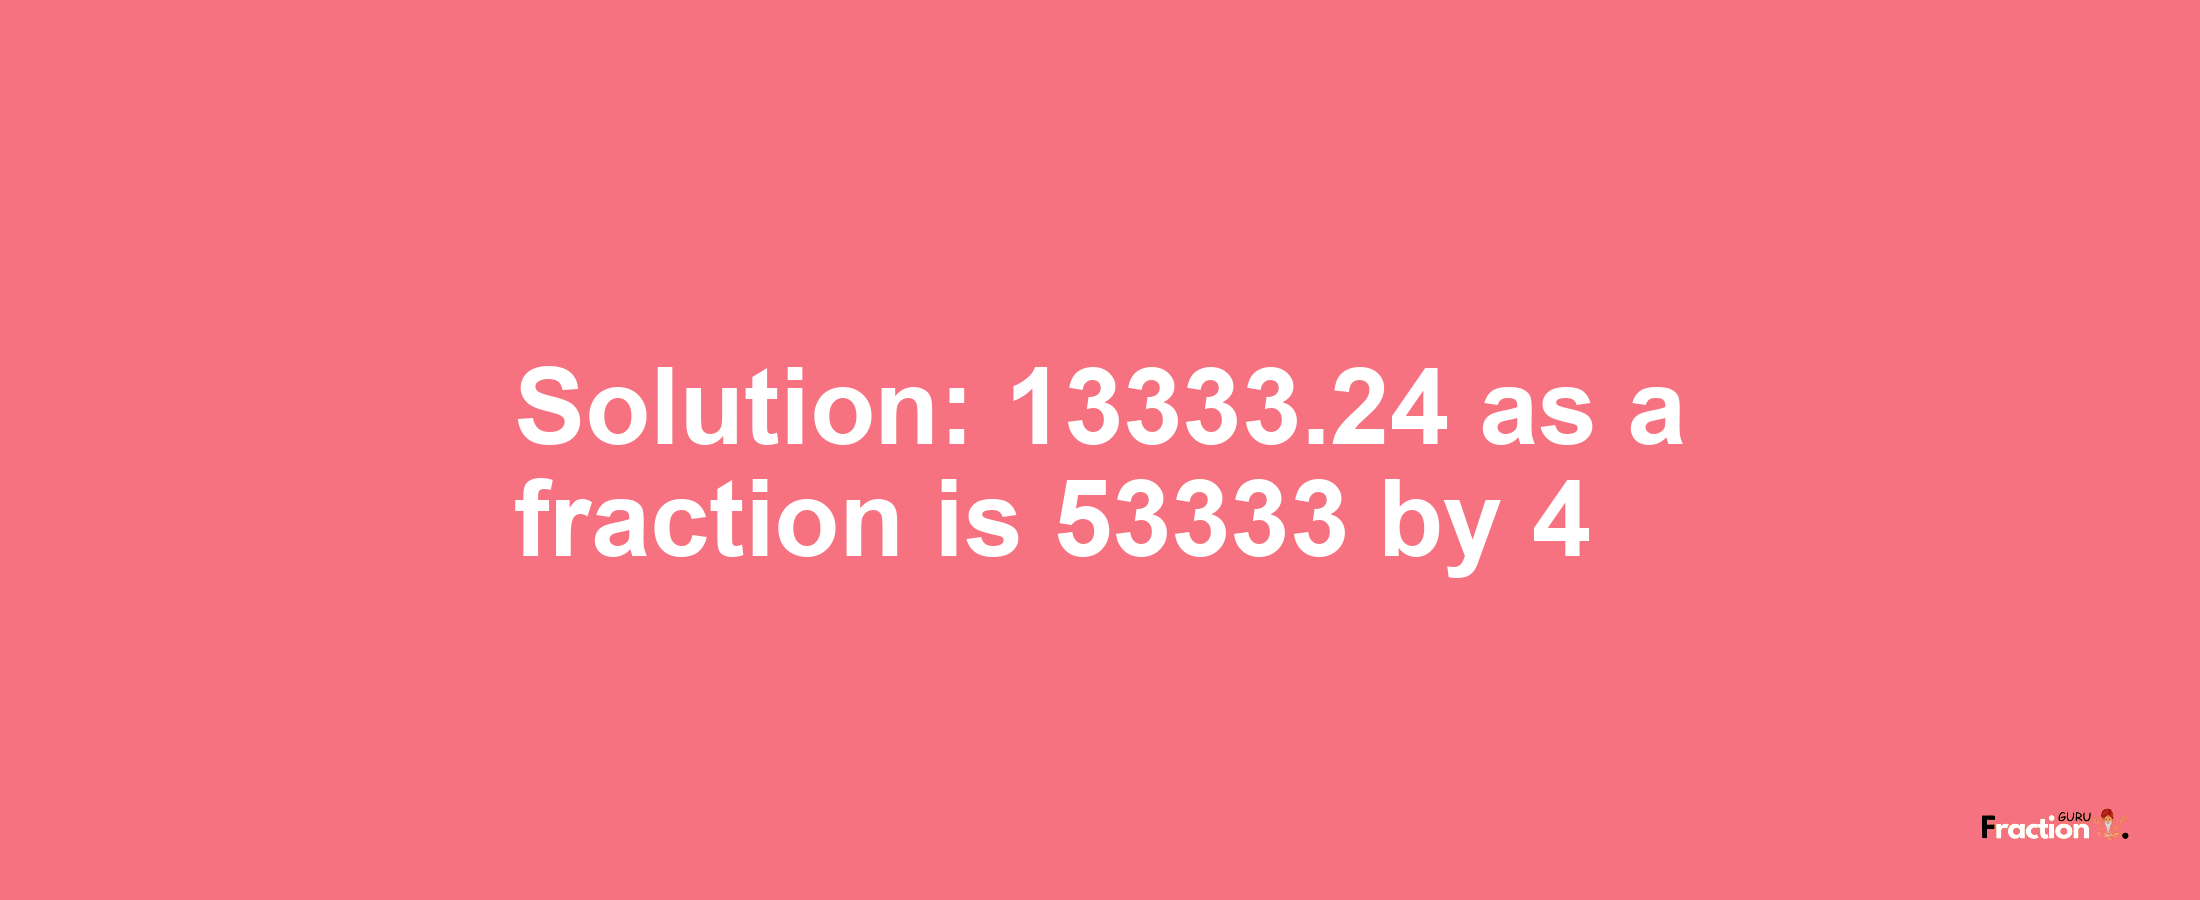 Solution:13333.24 as a fraction is 53333/4